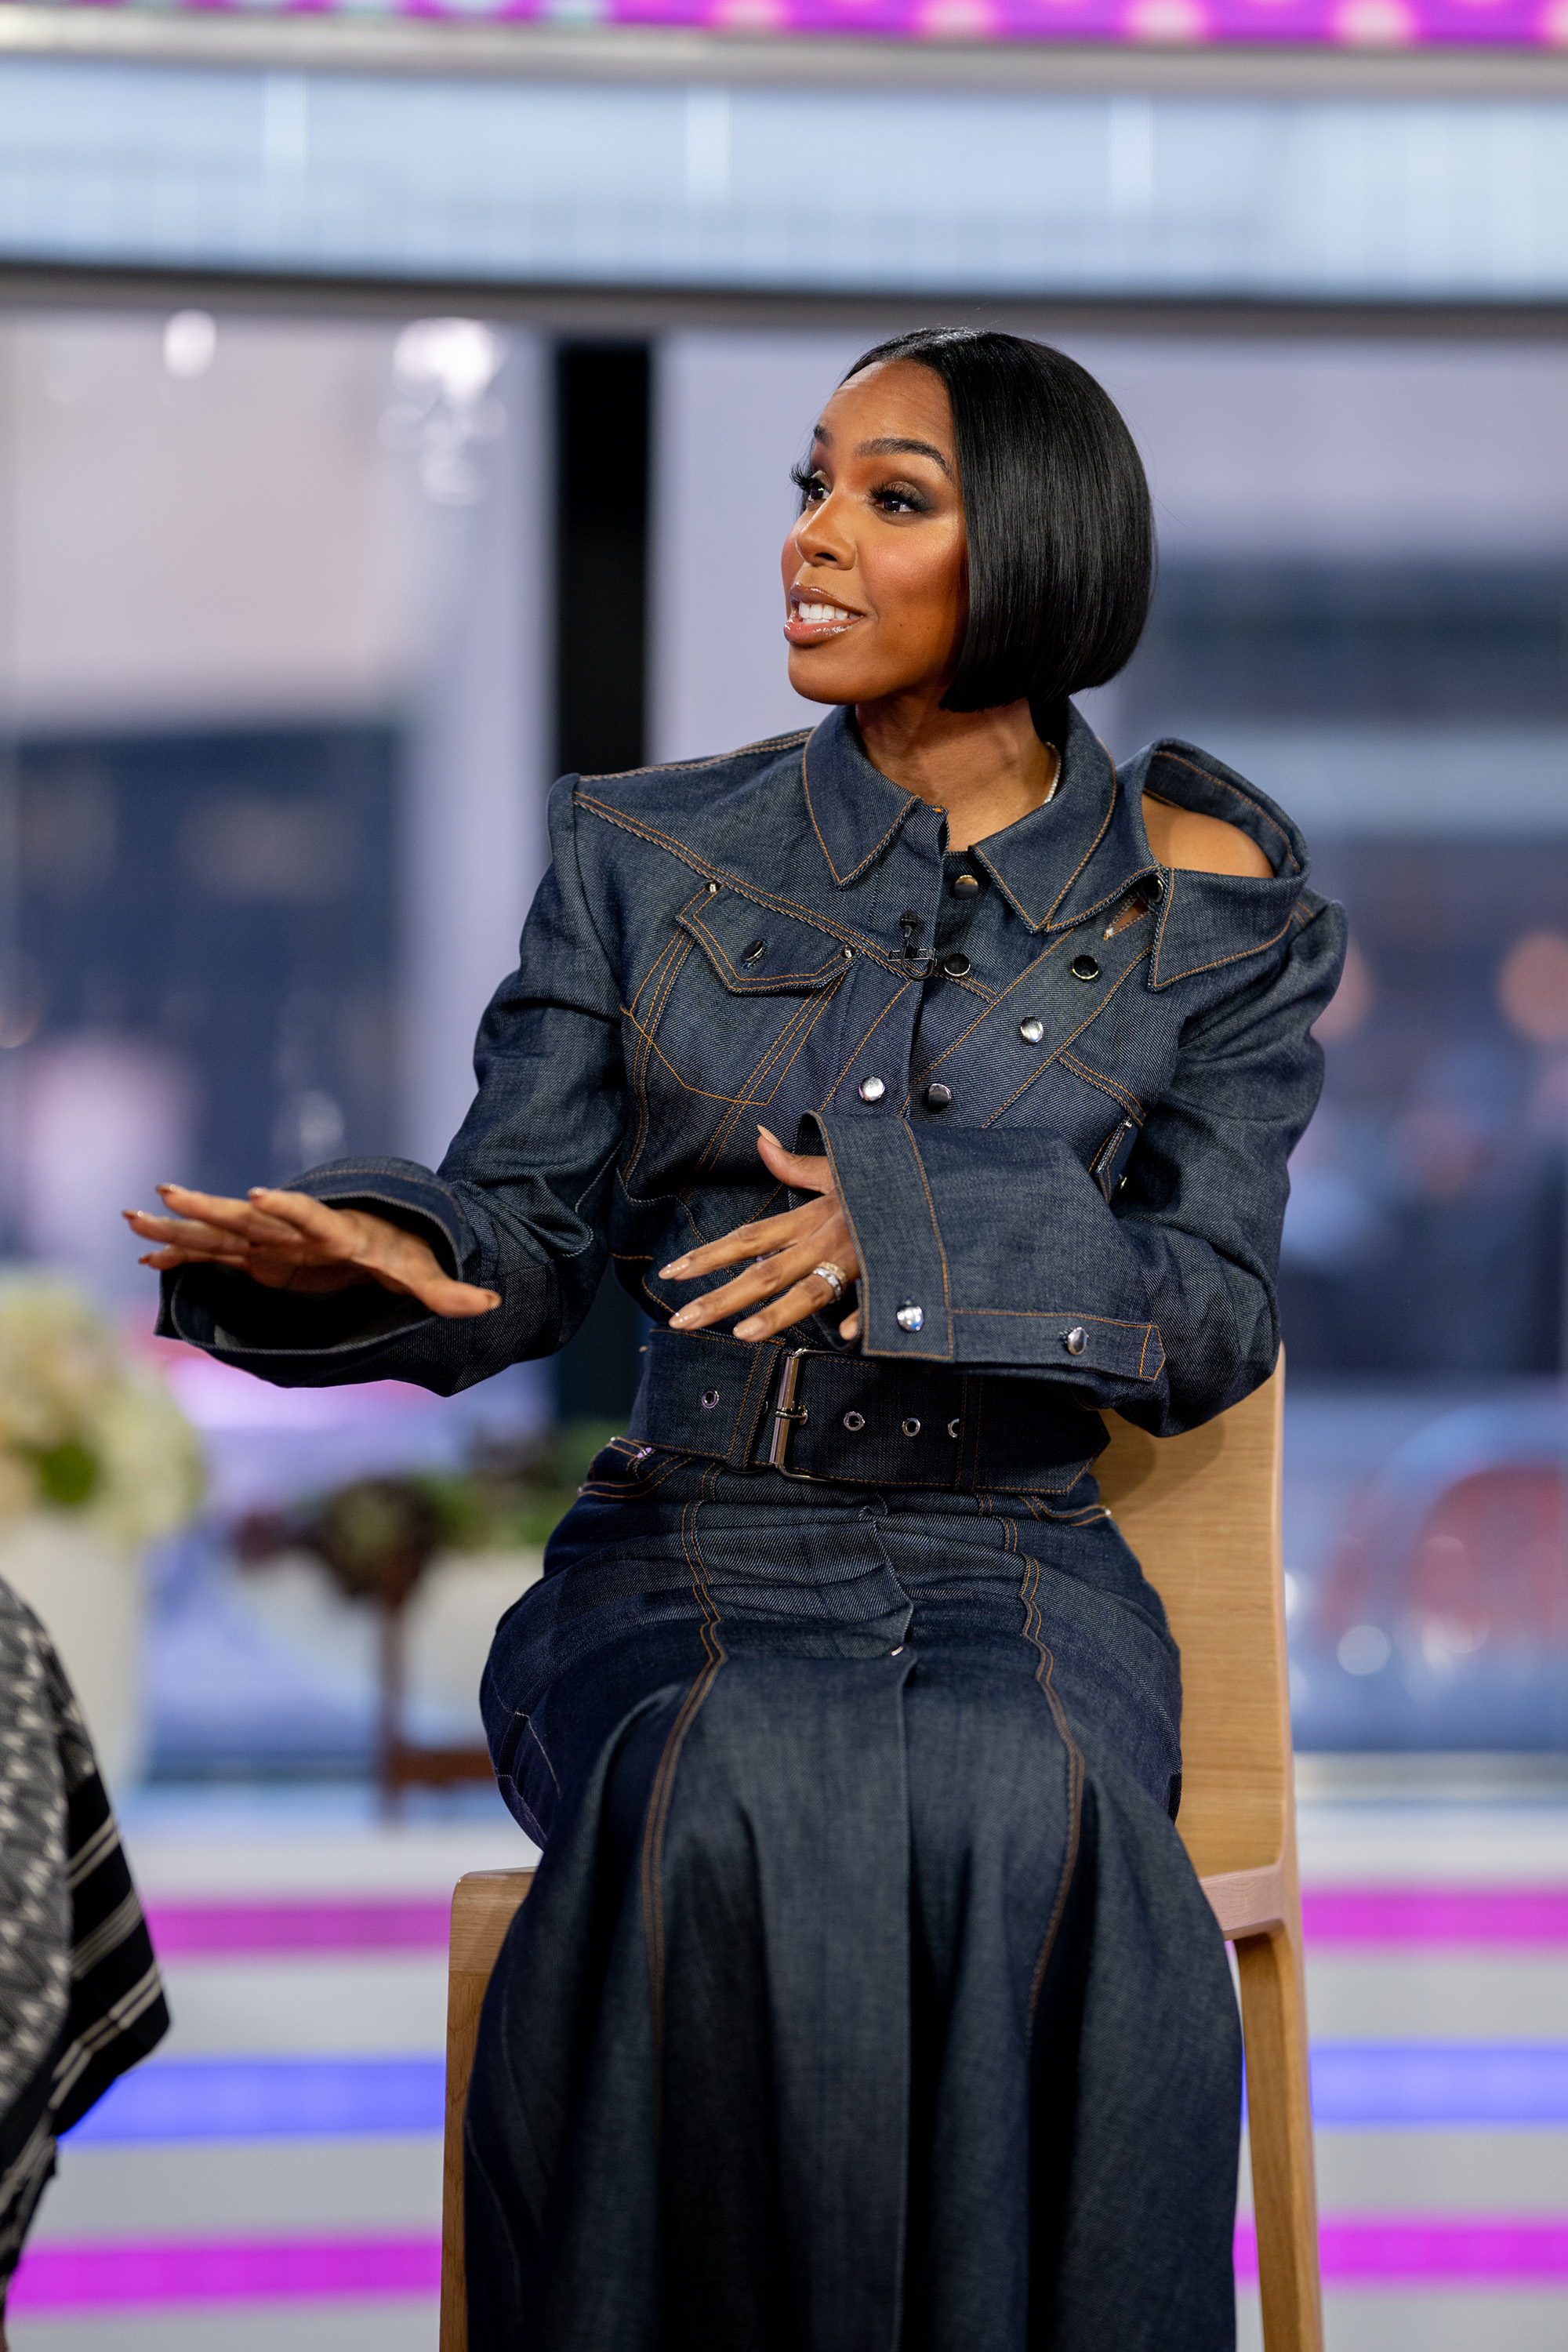 kelly in a stylized denim jacket and skirt speaks while seated, gesturing with her hand